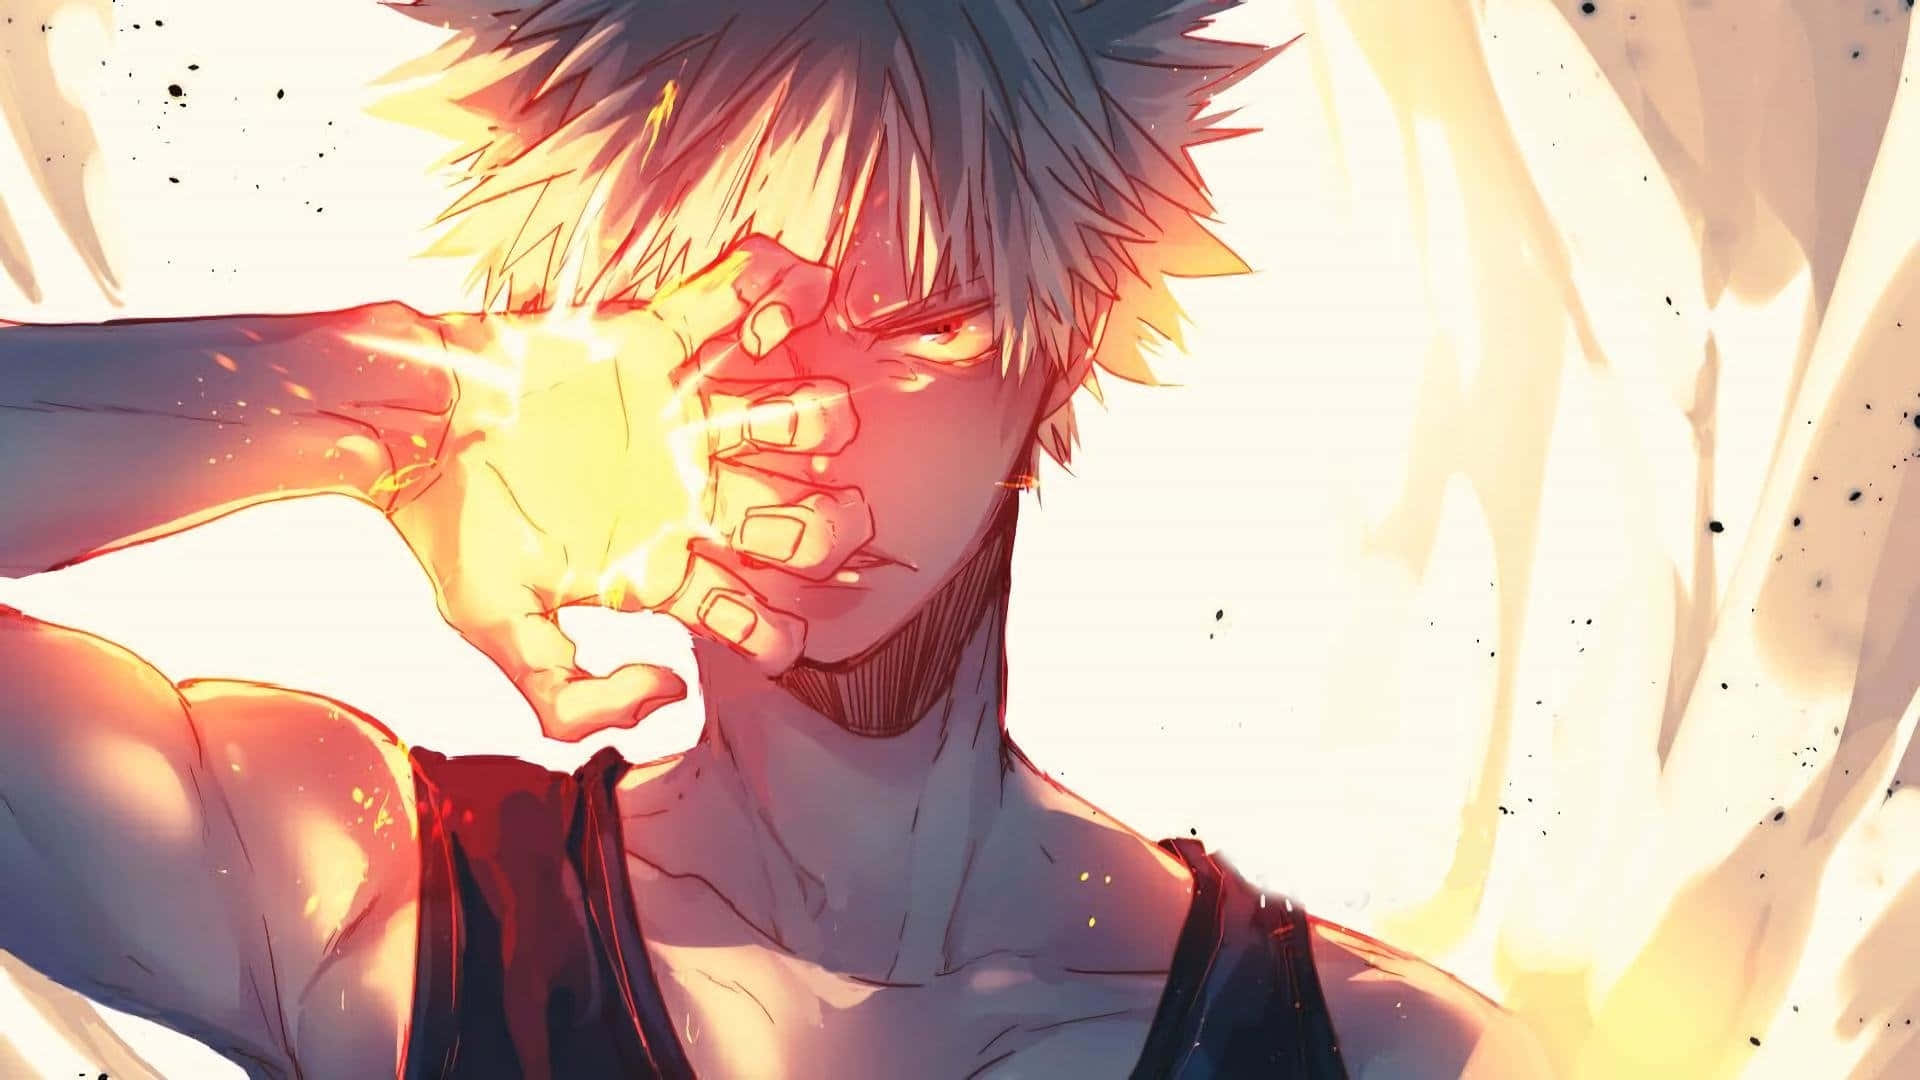 A Fierce and Determined Bakugo Unleashing His Explosive Quirk